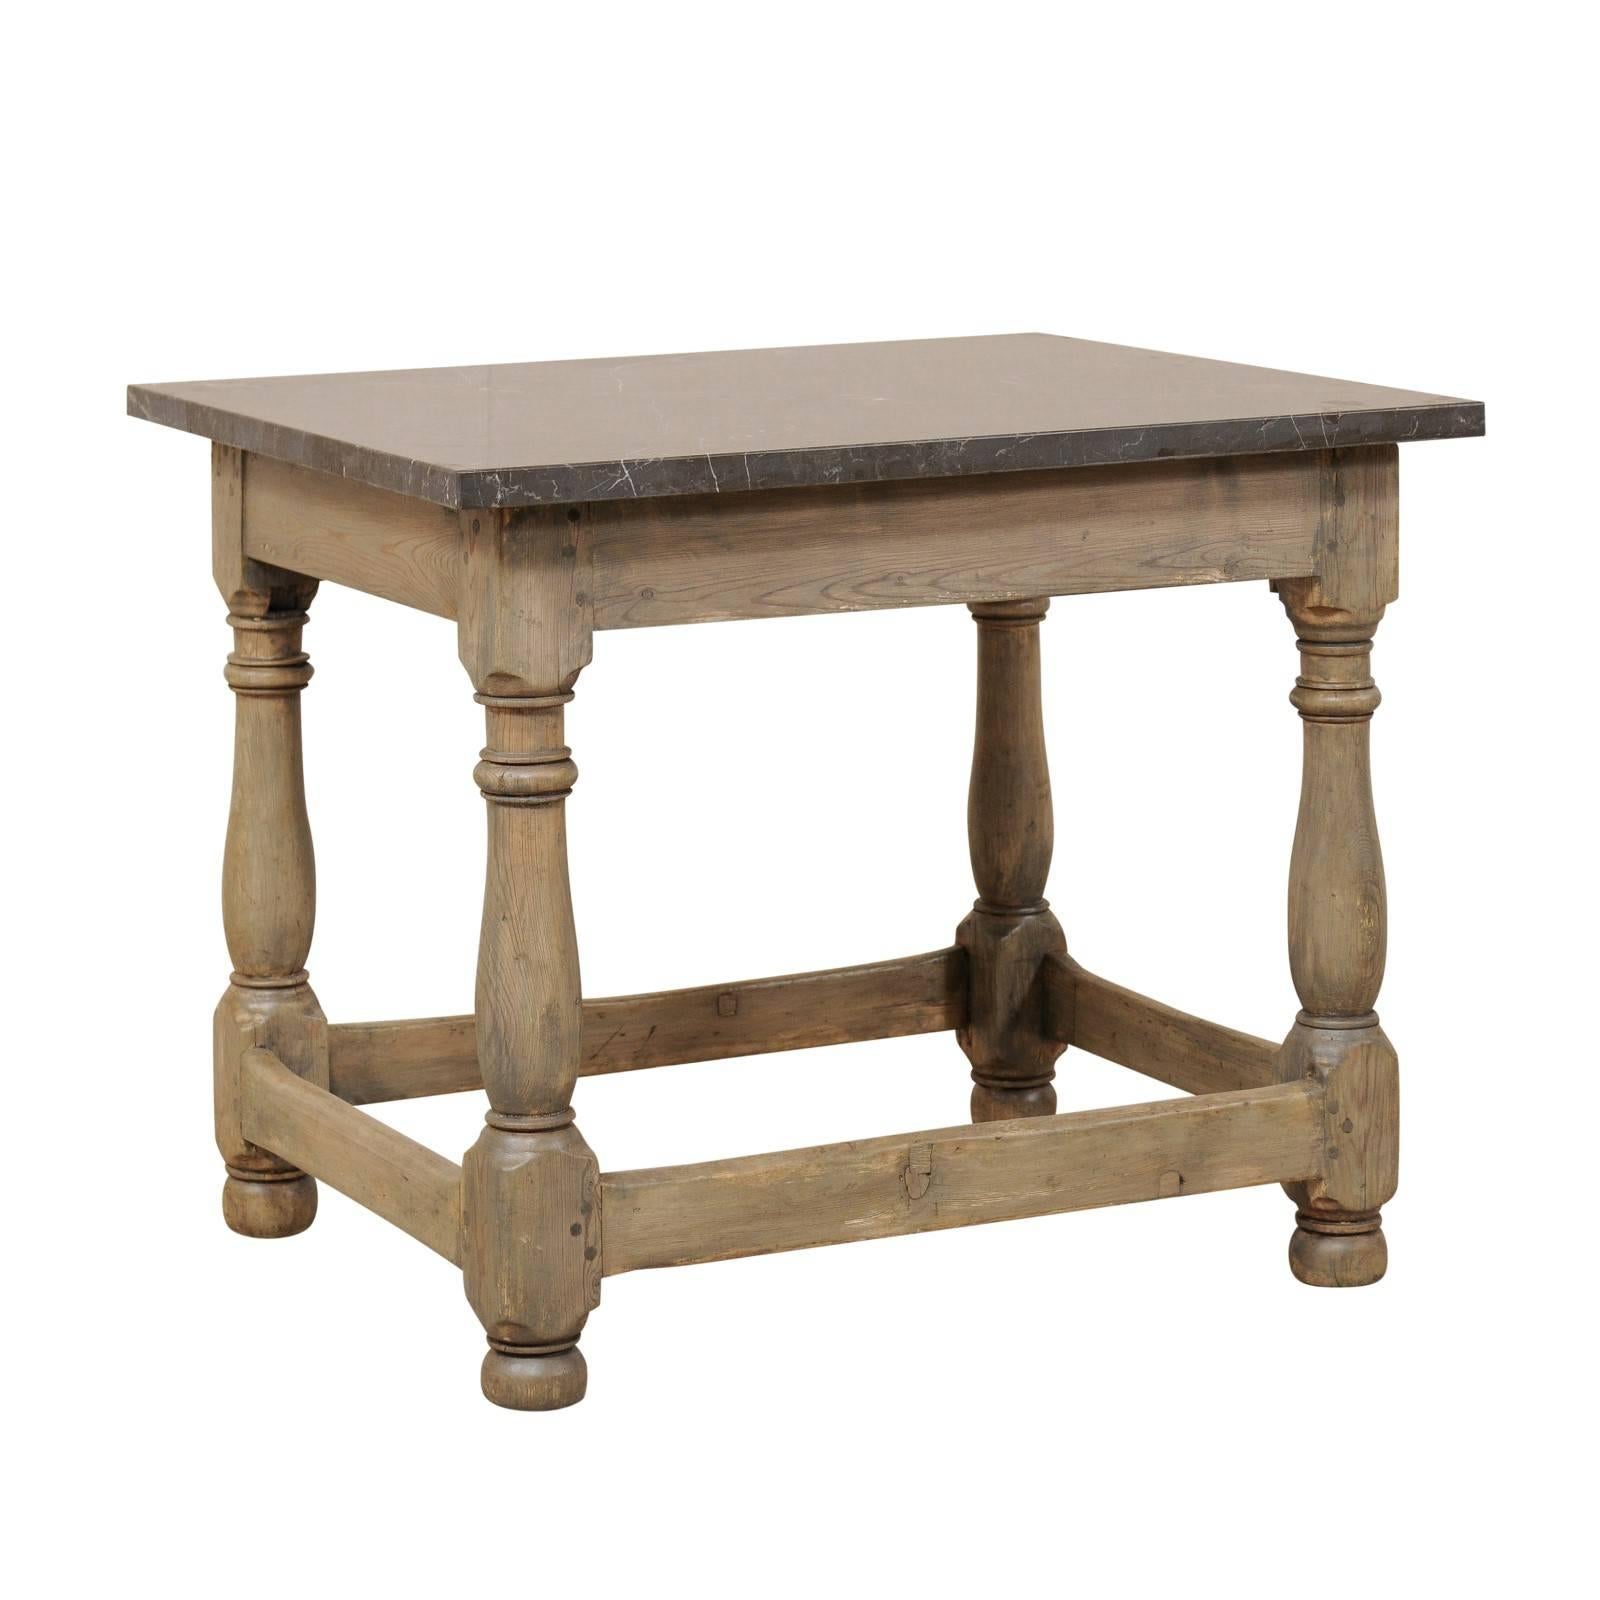 Swedish 18th Century Wood Occasional or Side Table with Honed Dark Marble Top